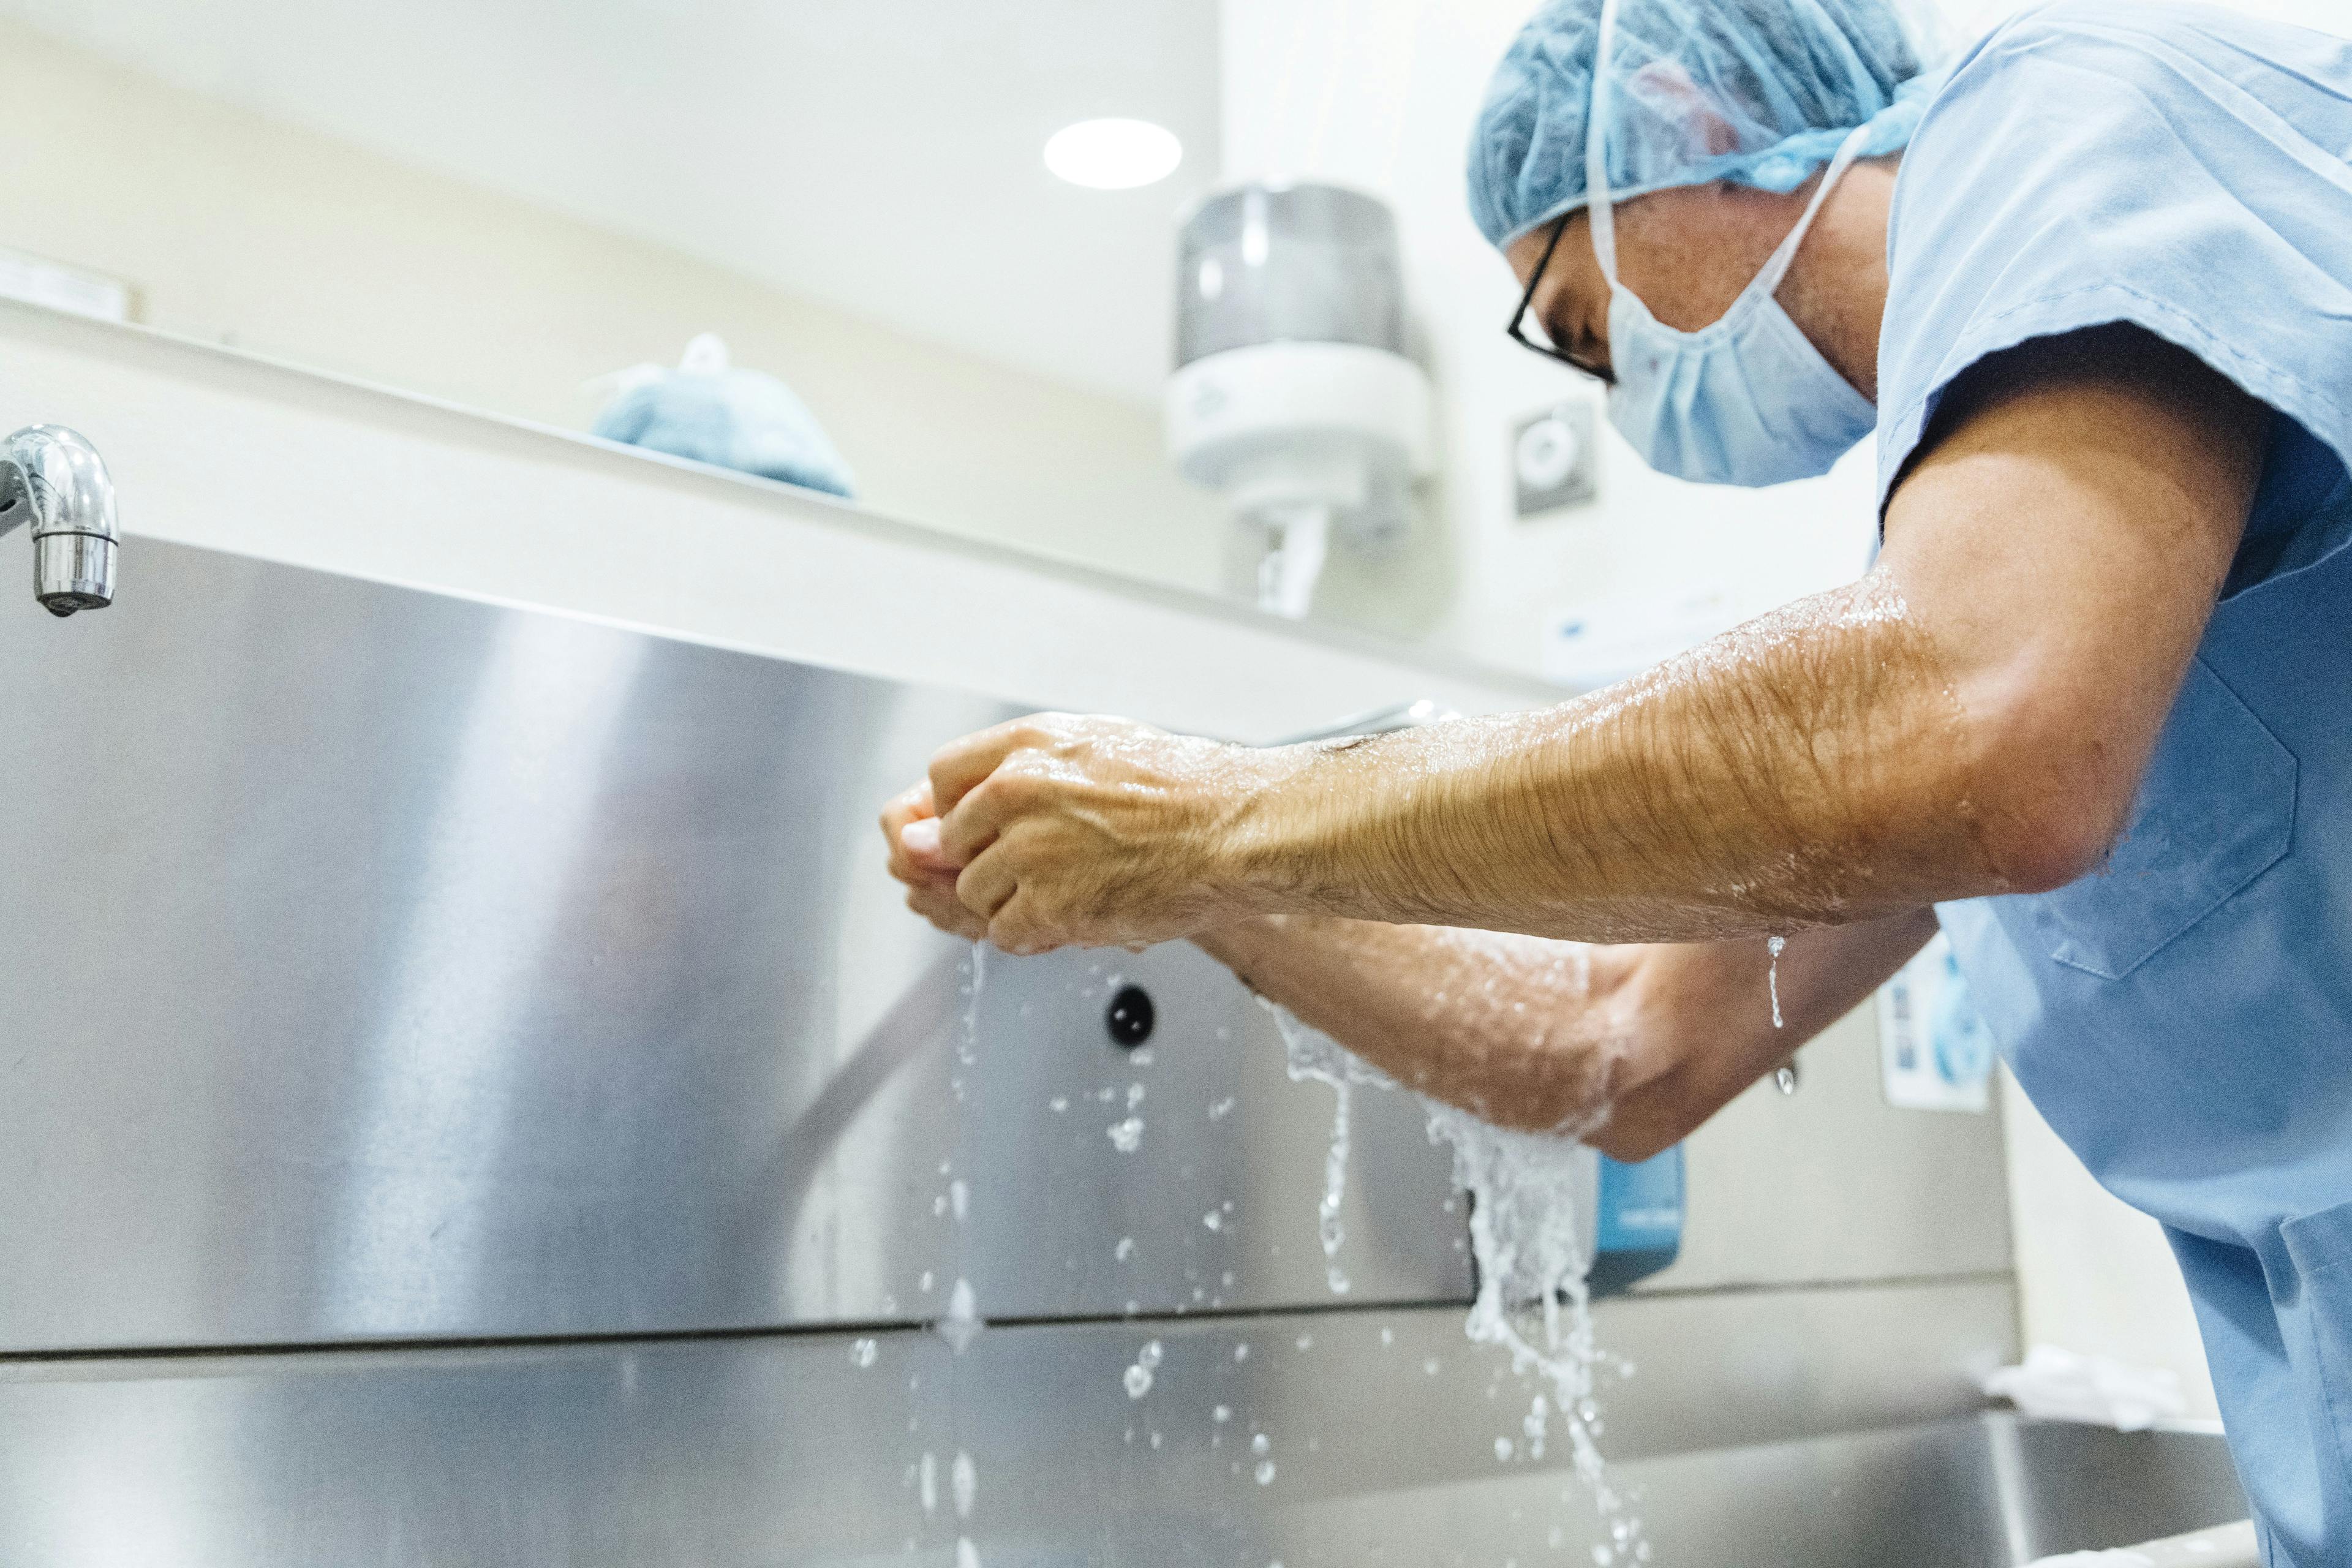 Hand Hygiene: Where Technology and Tradition Meet